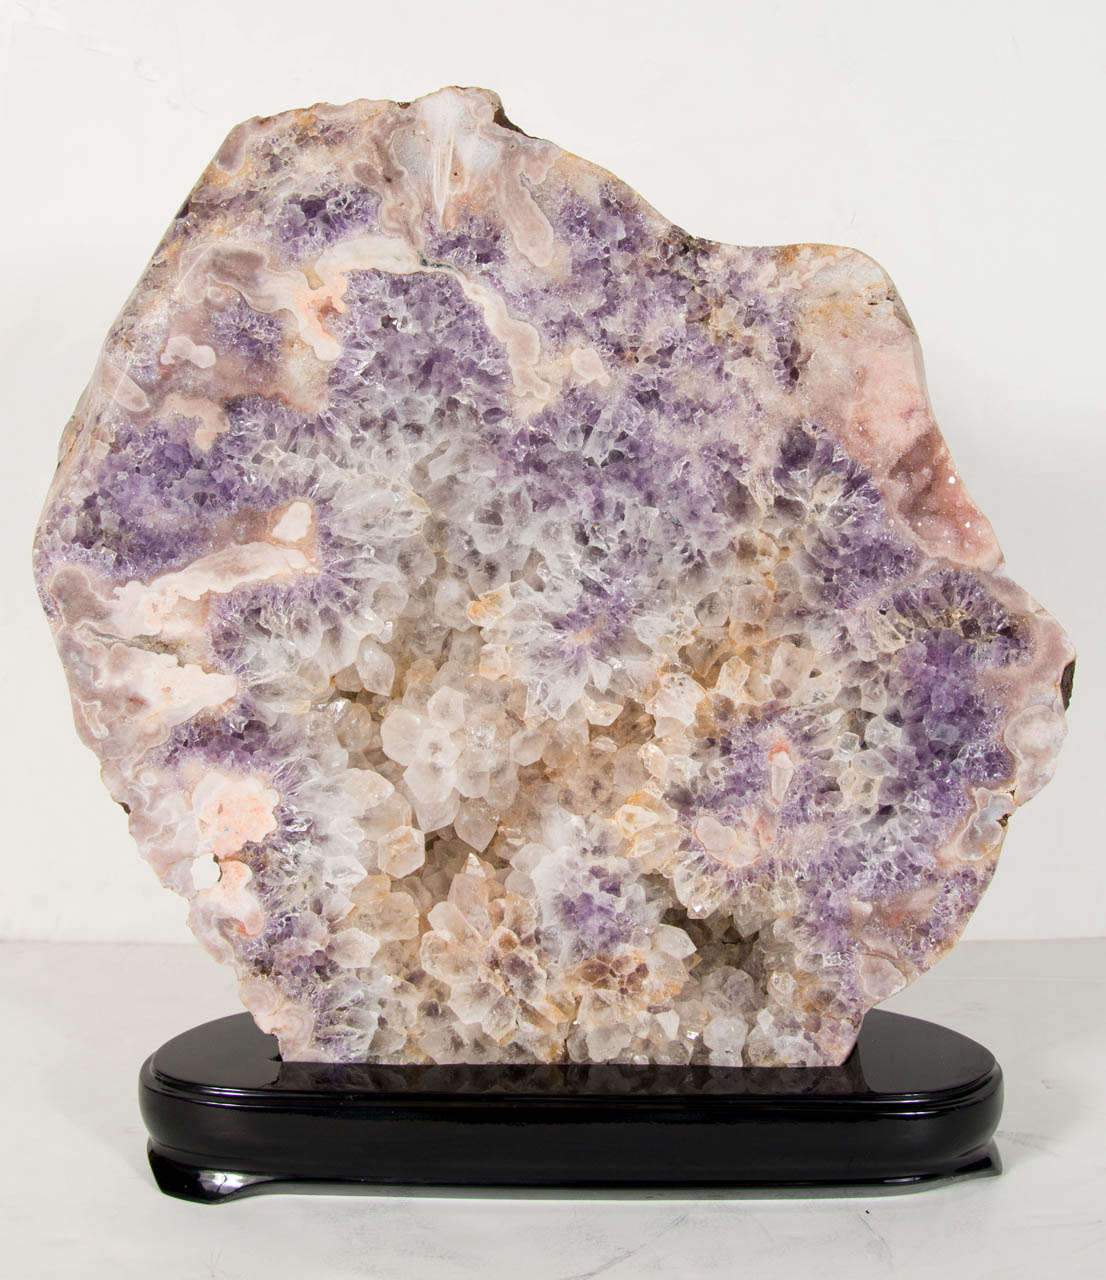 Spectacular sliced geode mineral specimen of Quartz that frames an exquisite array of organic crystalized spokes that form beautiful vignettes of Quartz & Amethyst crystals that are set inside a creamy white surrounding. Mounted on an ebonized